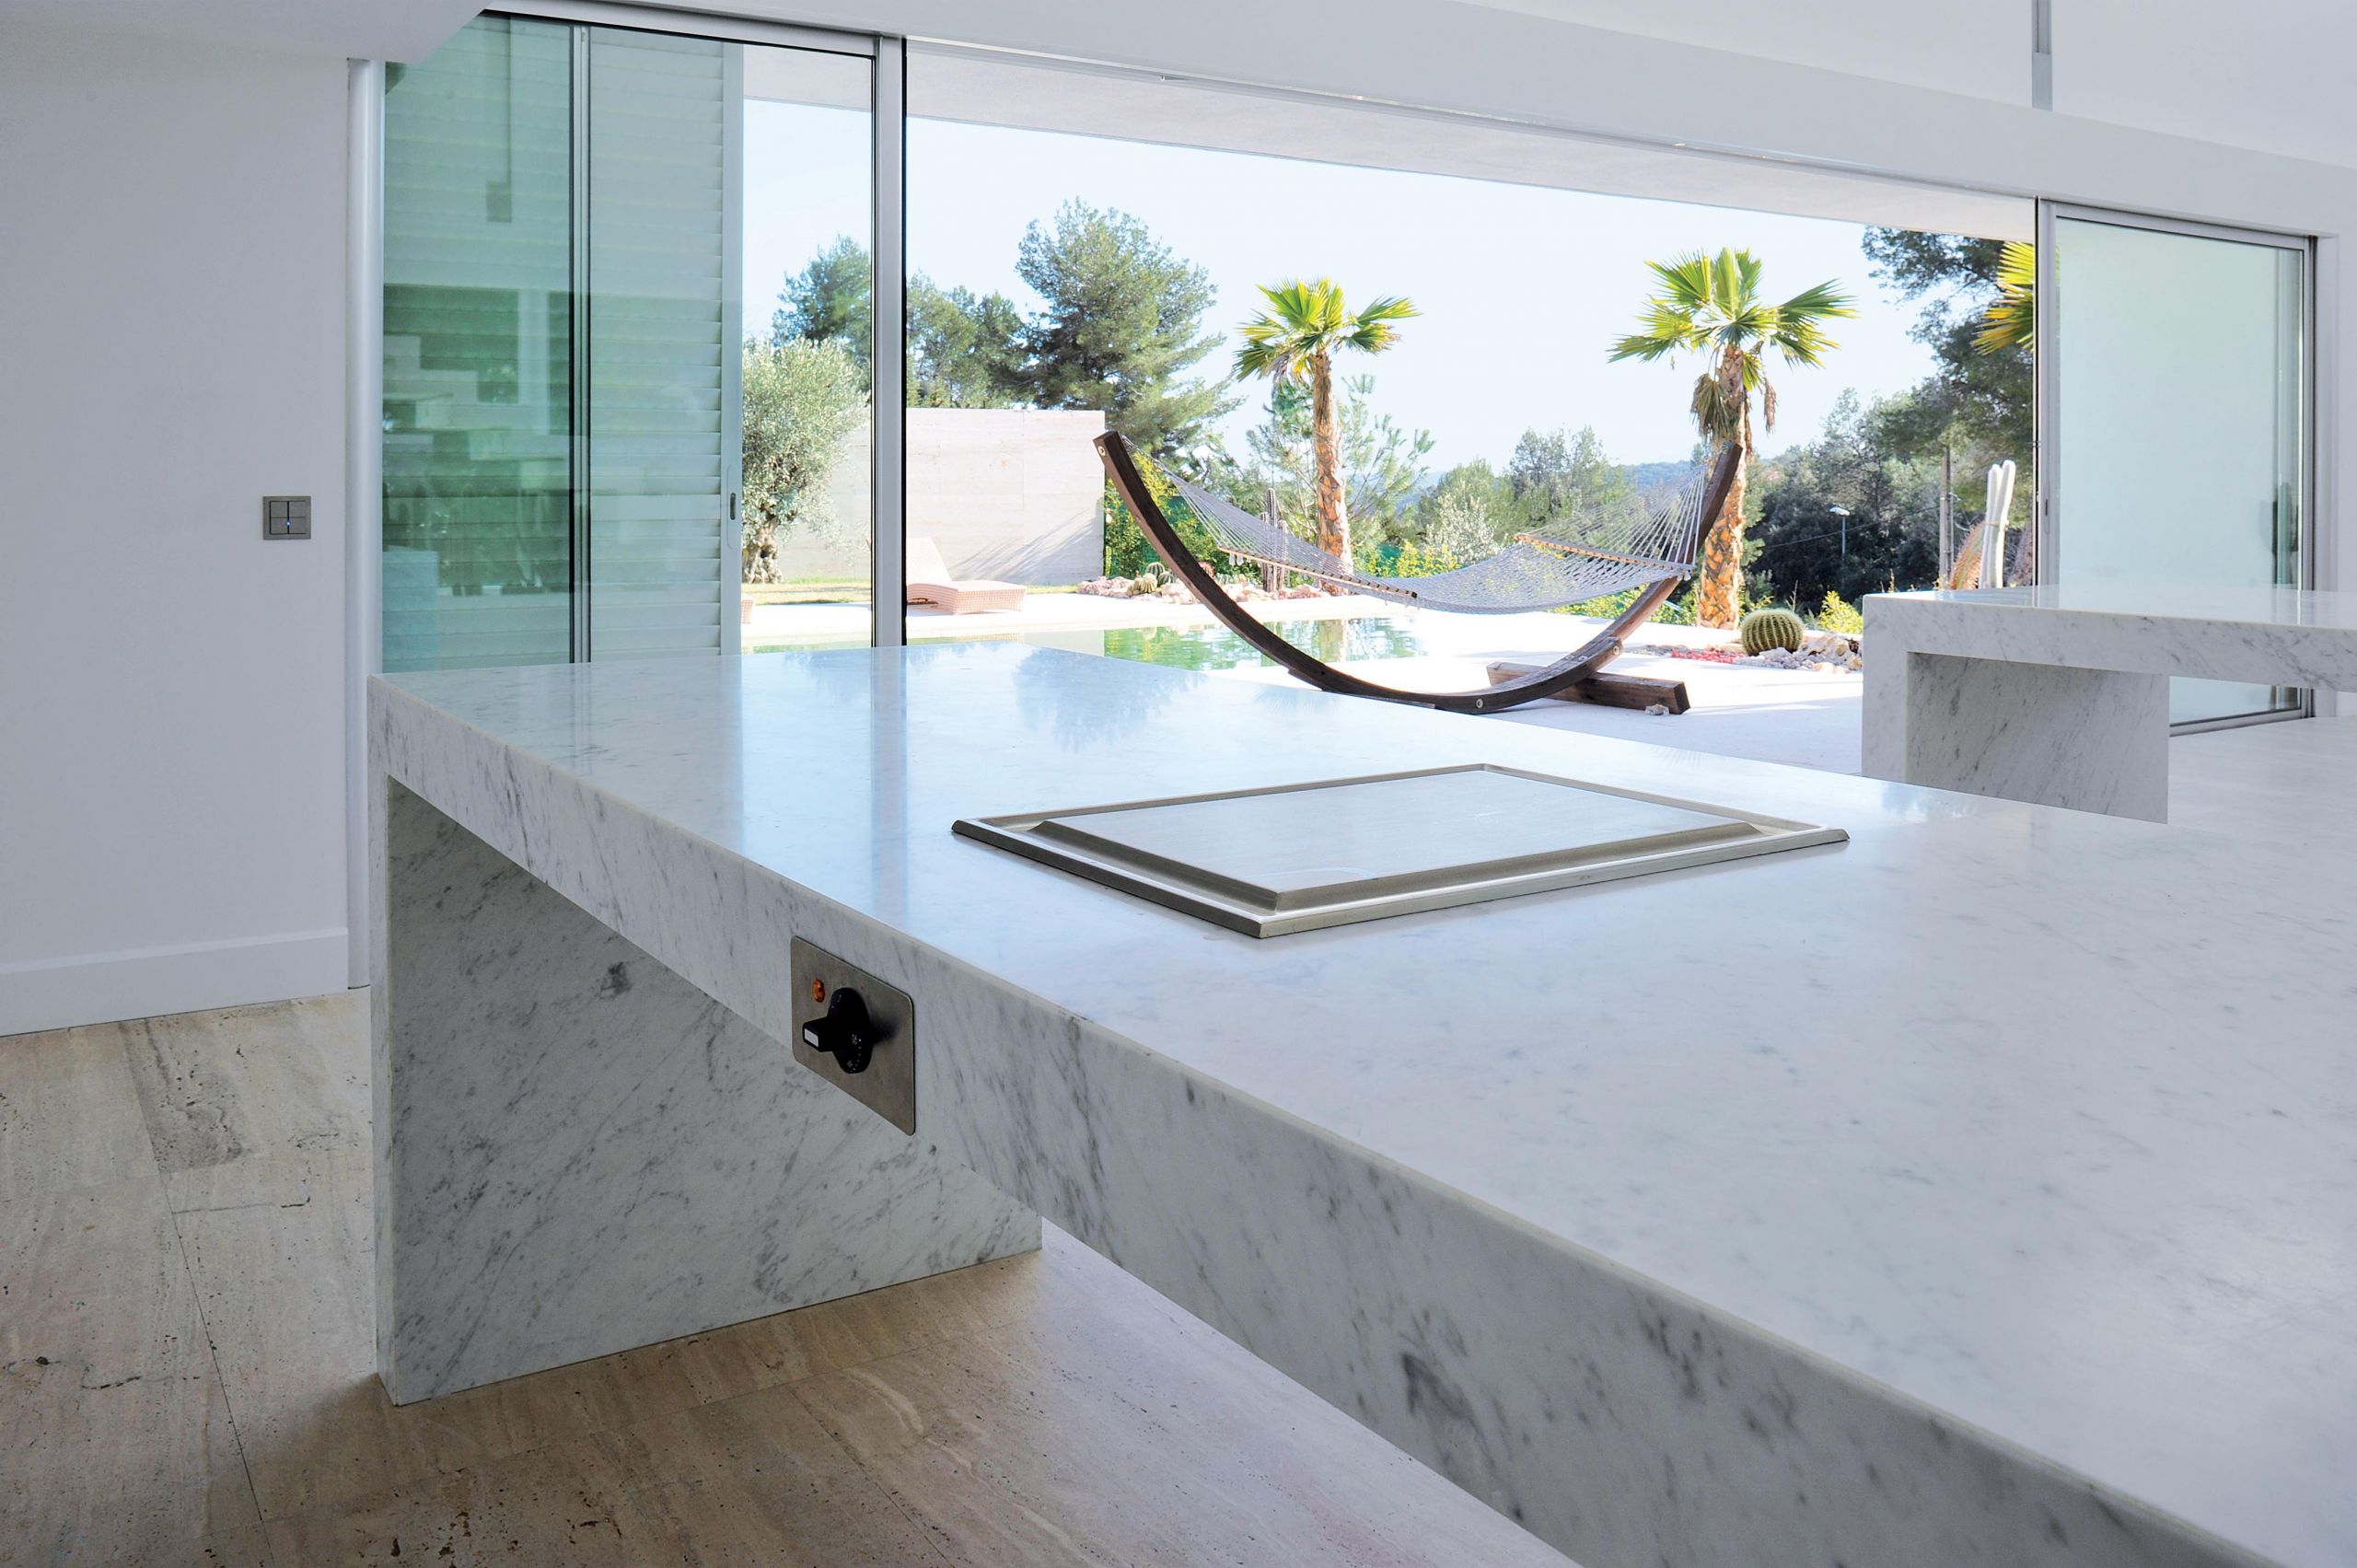 Immaculate white lacquer kitchen with Carrera marble countertops - Atelier  de Saint Paul